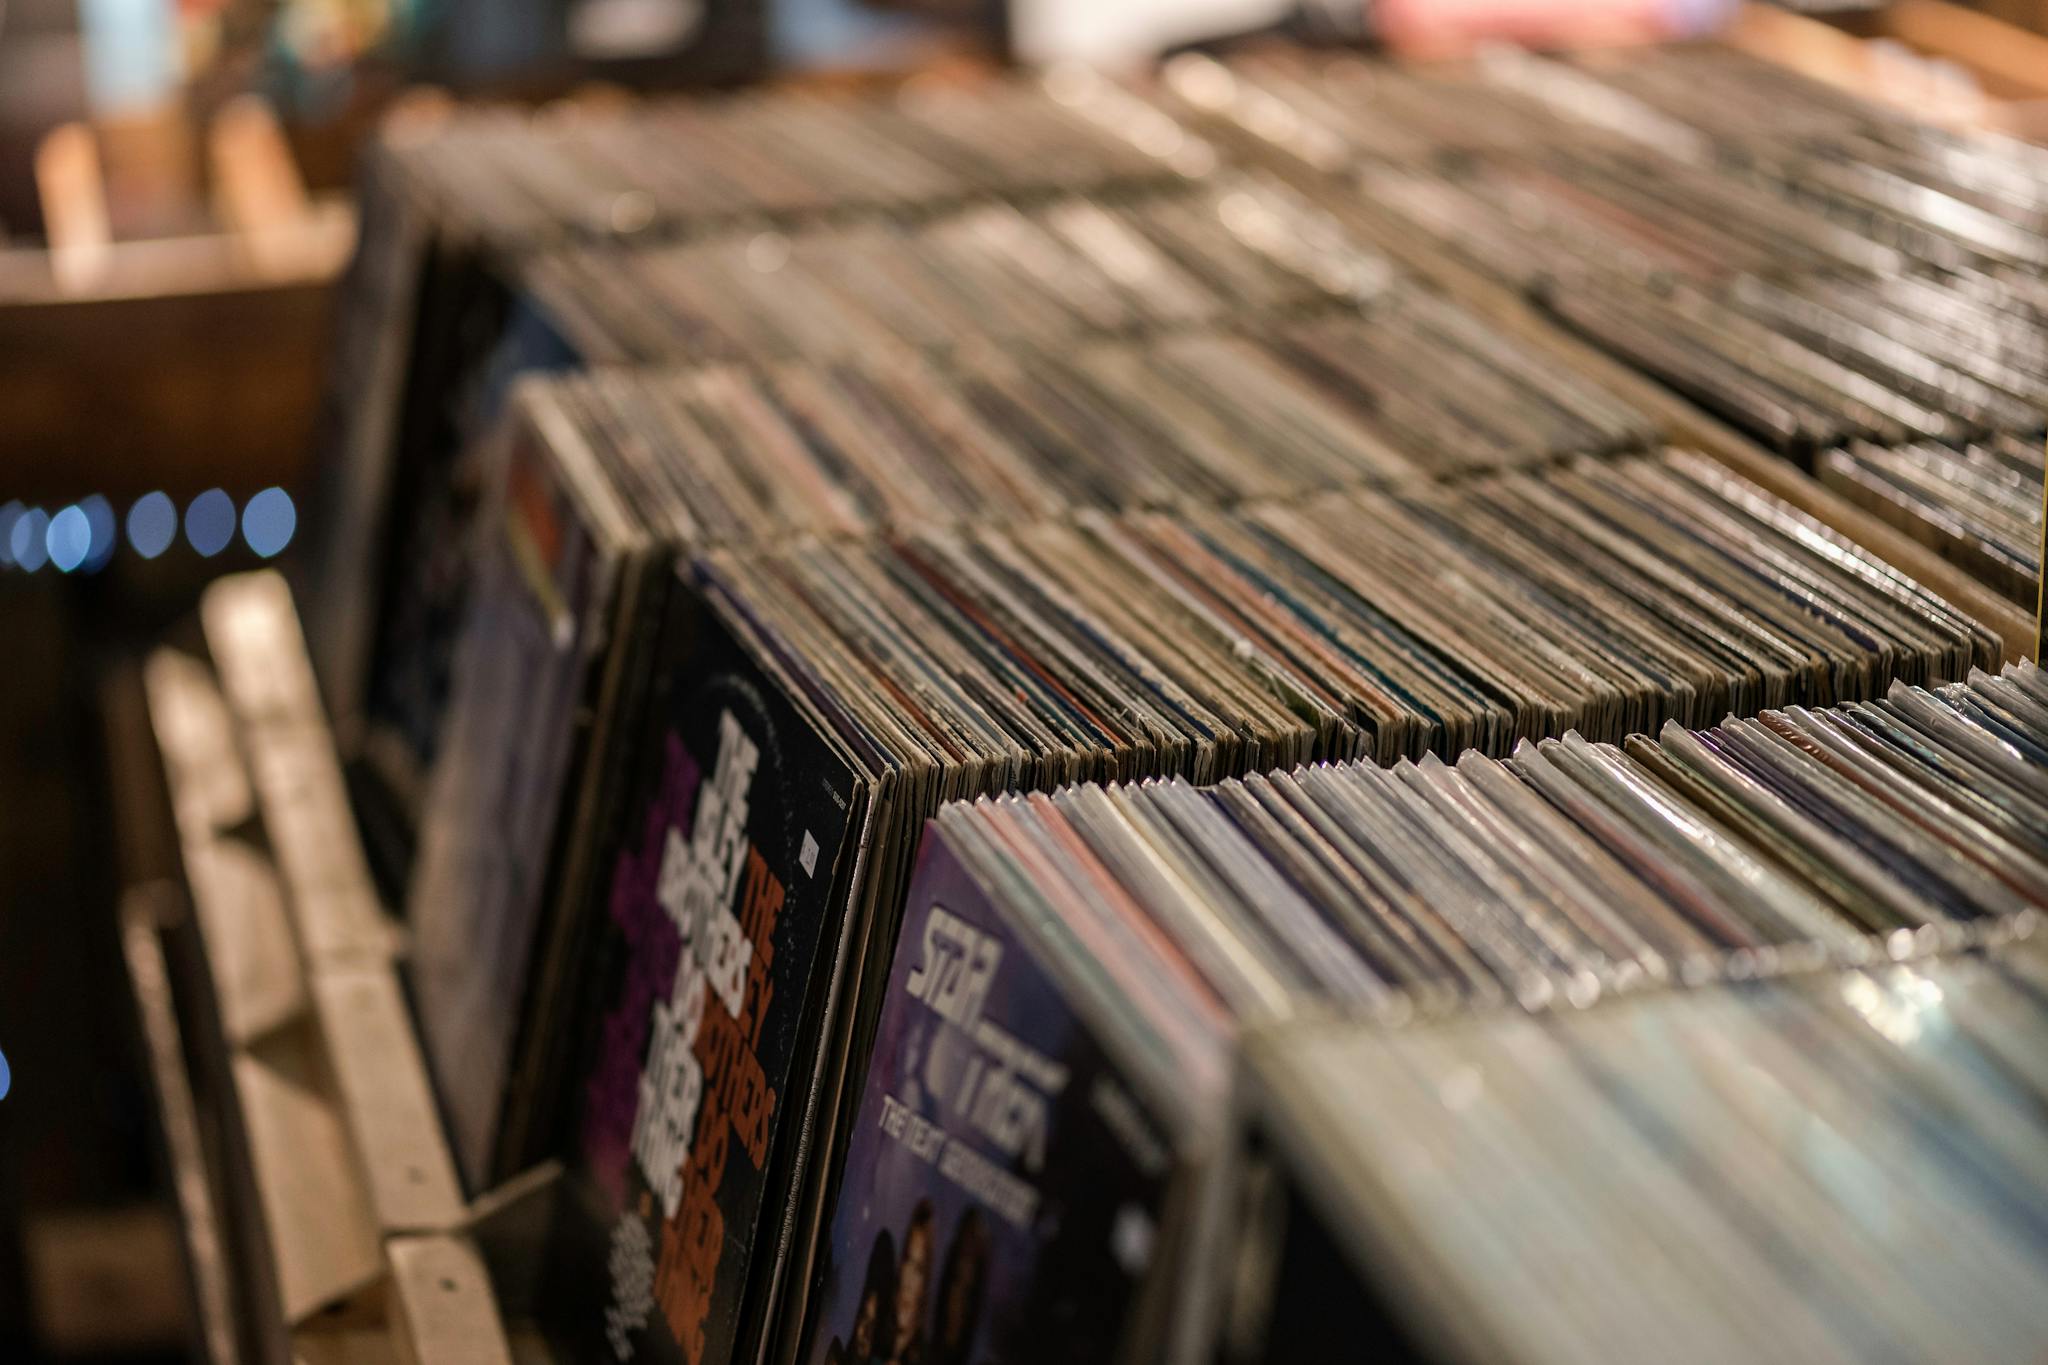 vinyl records sampling clearance myths misconceptions